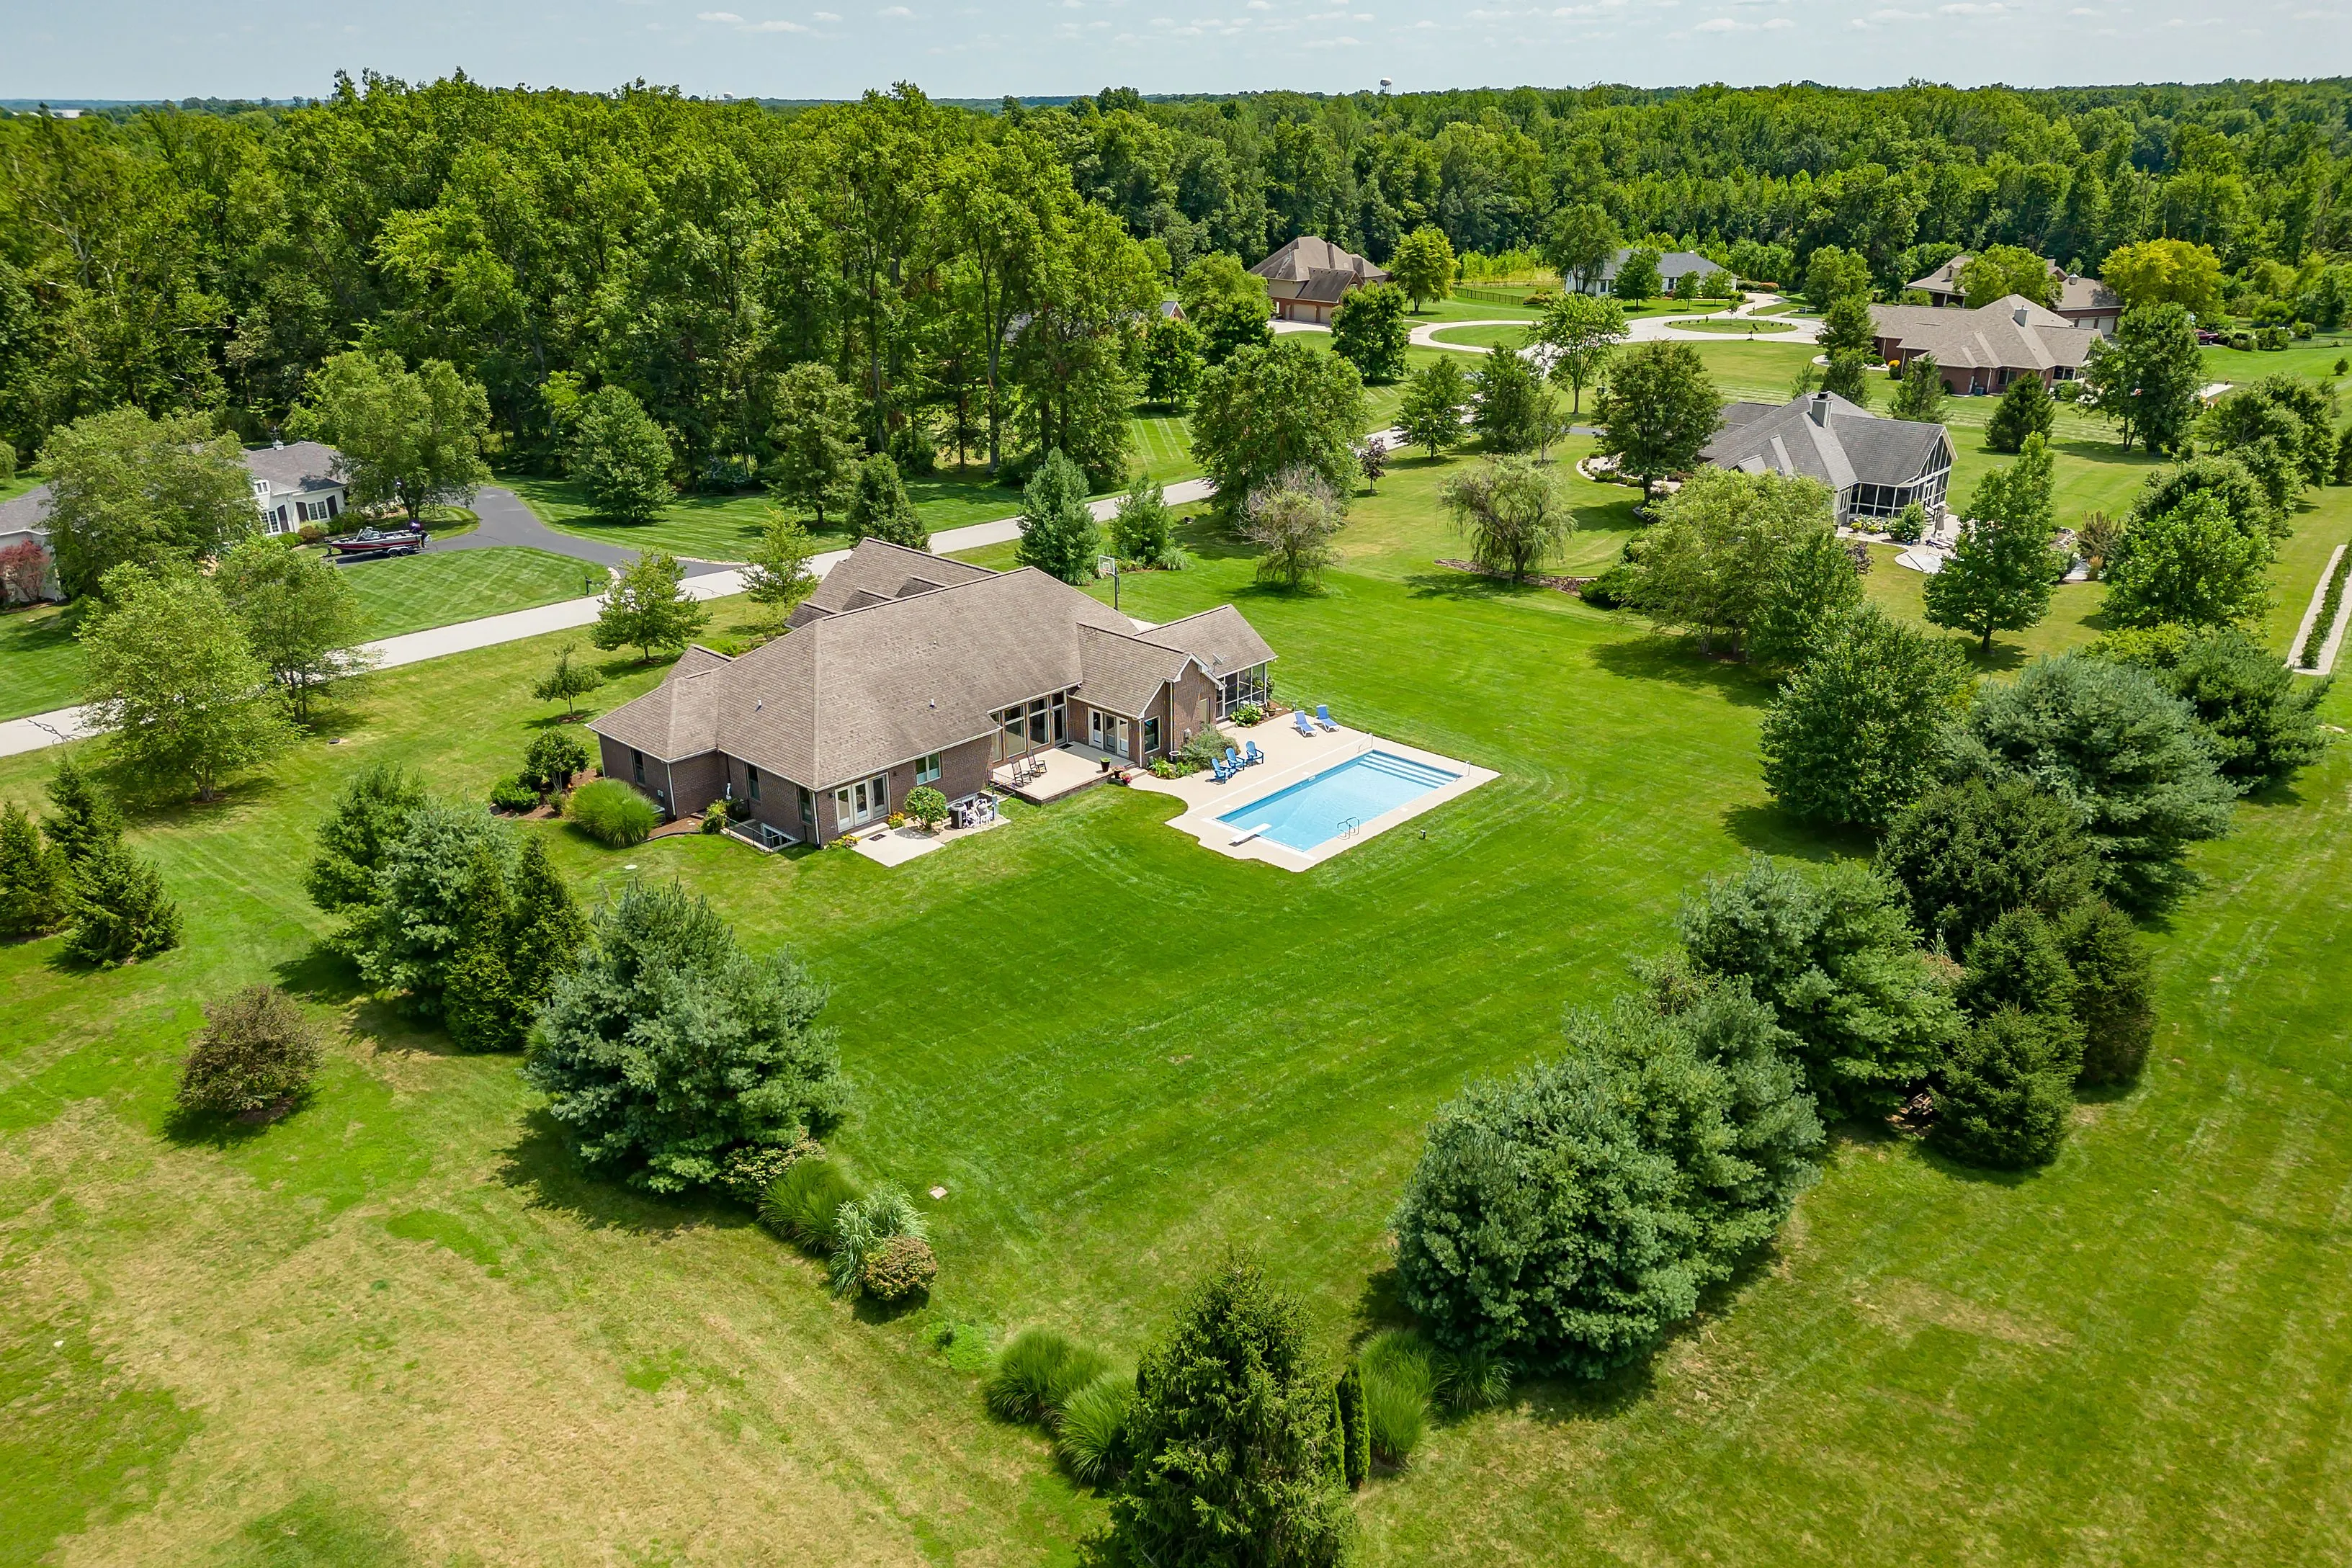 Aerial view of a spacious residential property with a large house, swimming pool, and surrounding greenery.